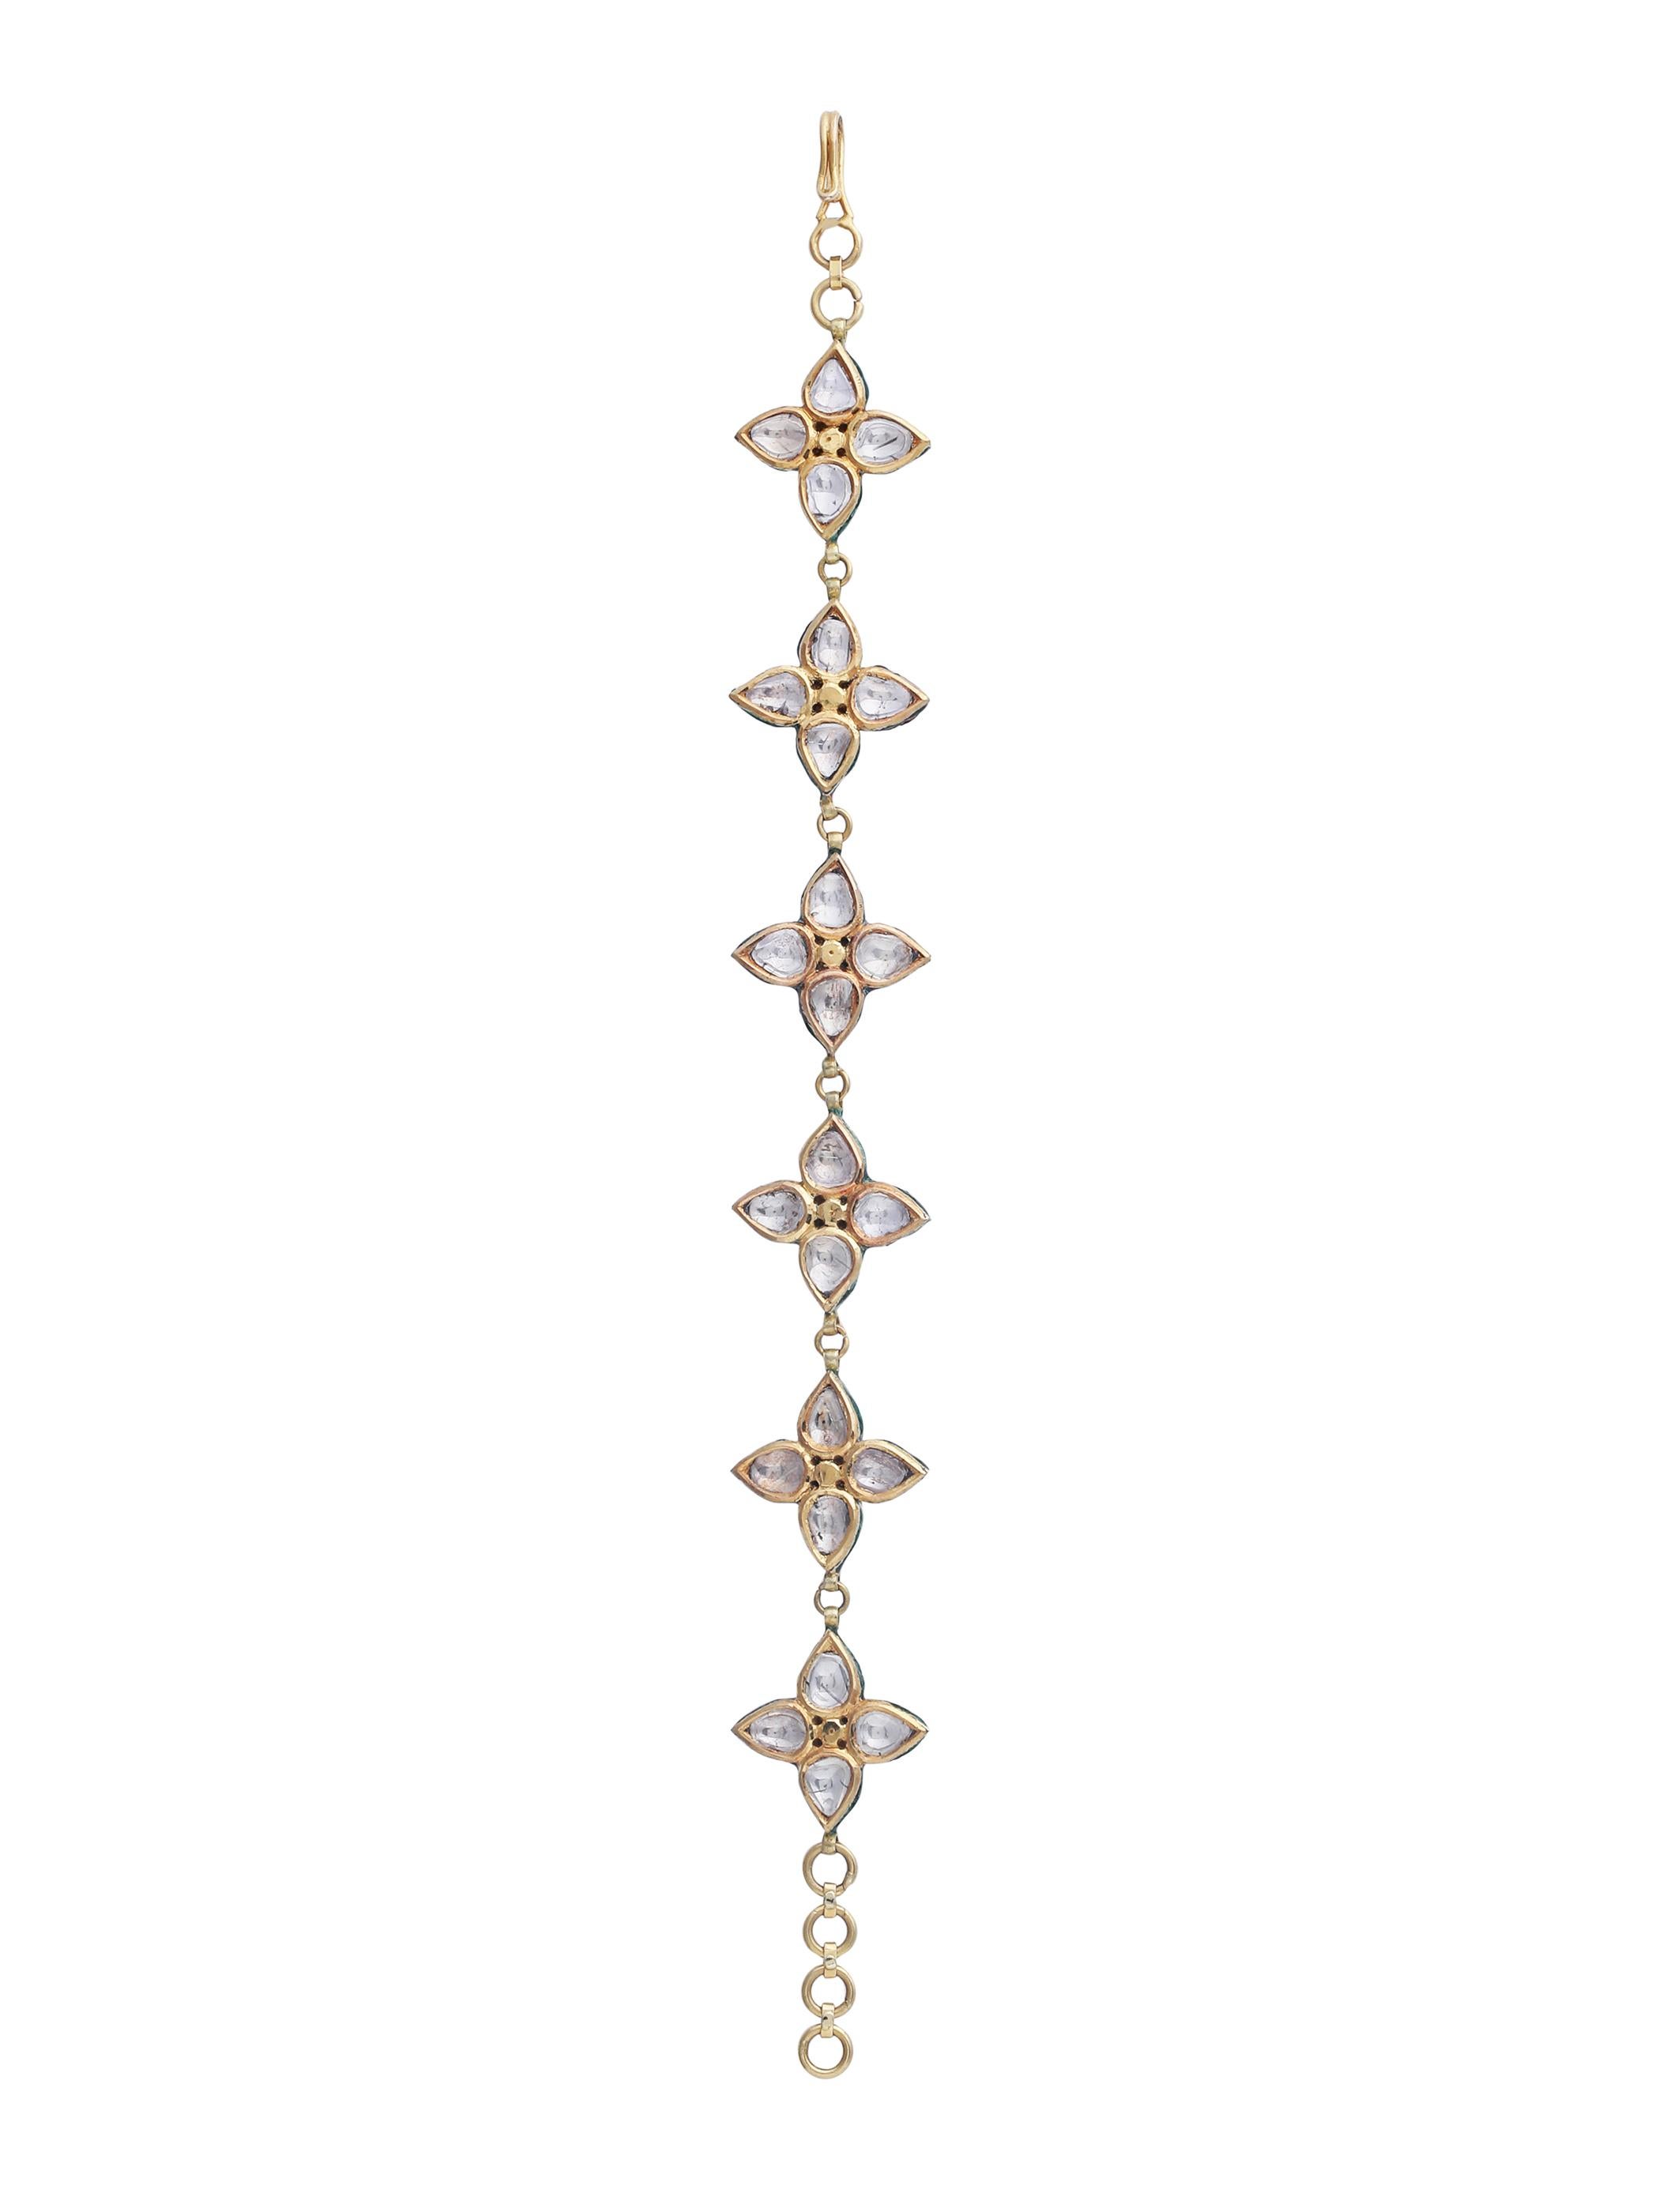 The beautiful piece handmade in 18k gold encrusted with uncut diamonds is craftsmanship at its best.
With intricate enamel at the back, the chain bracelet has six pieces of a floral motif. The jewellery piece has been designed to be adjustable and